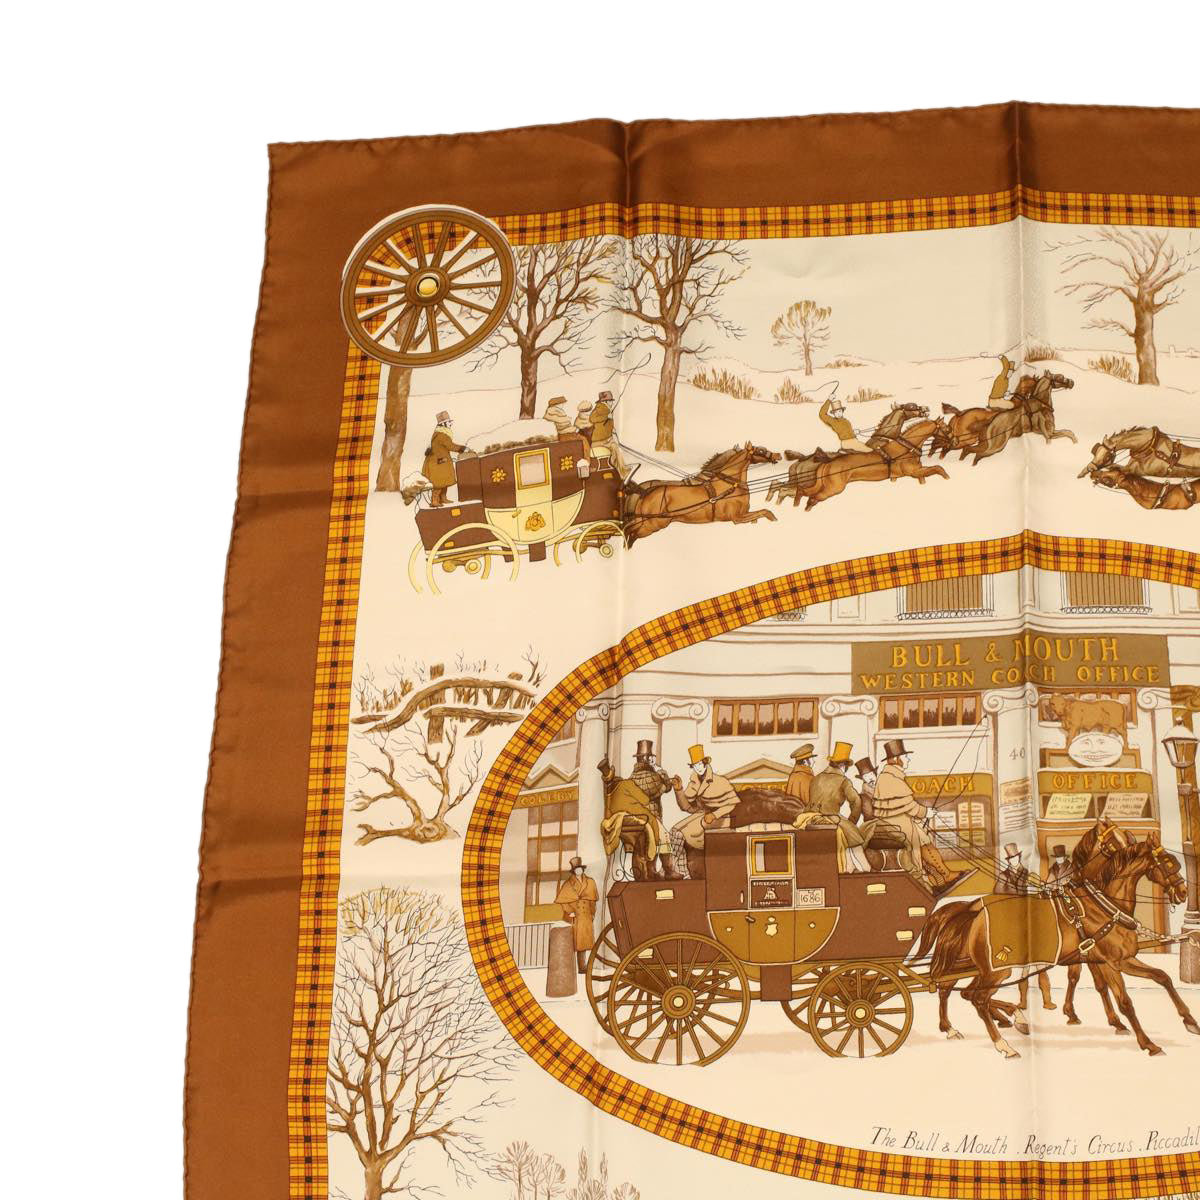 HERMES Carre 90 The Bull & Mouth Regents Circus Piccadilly Scarf Auth yk6054